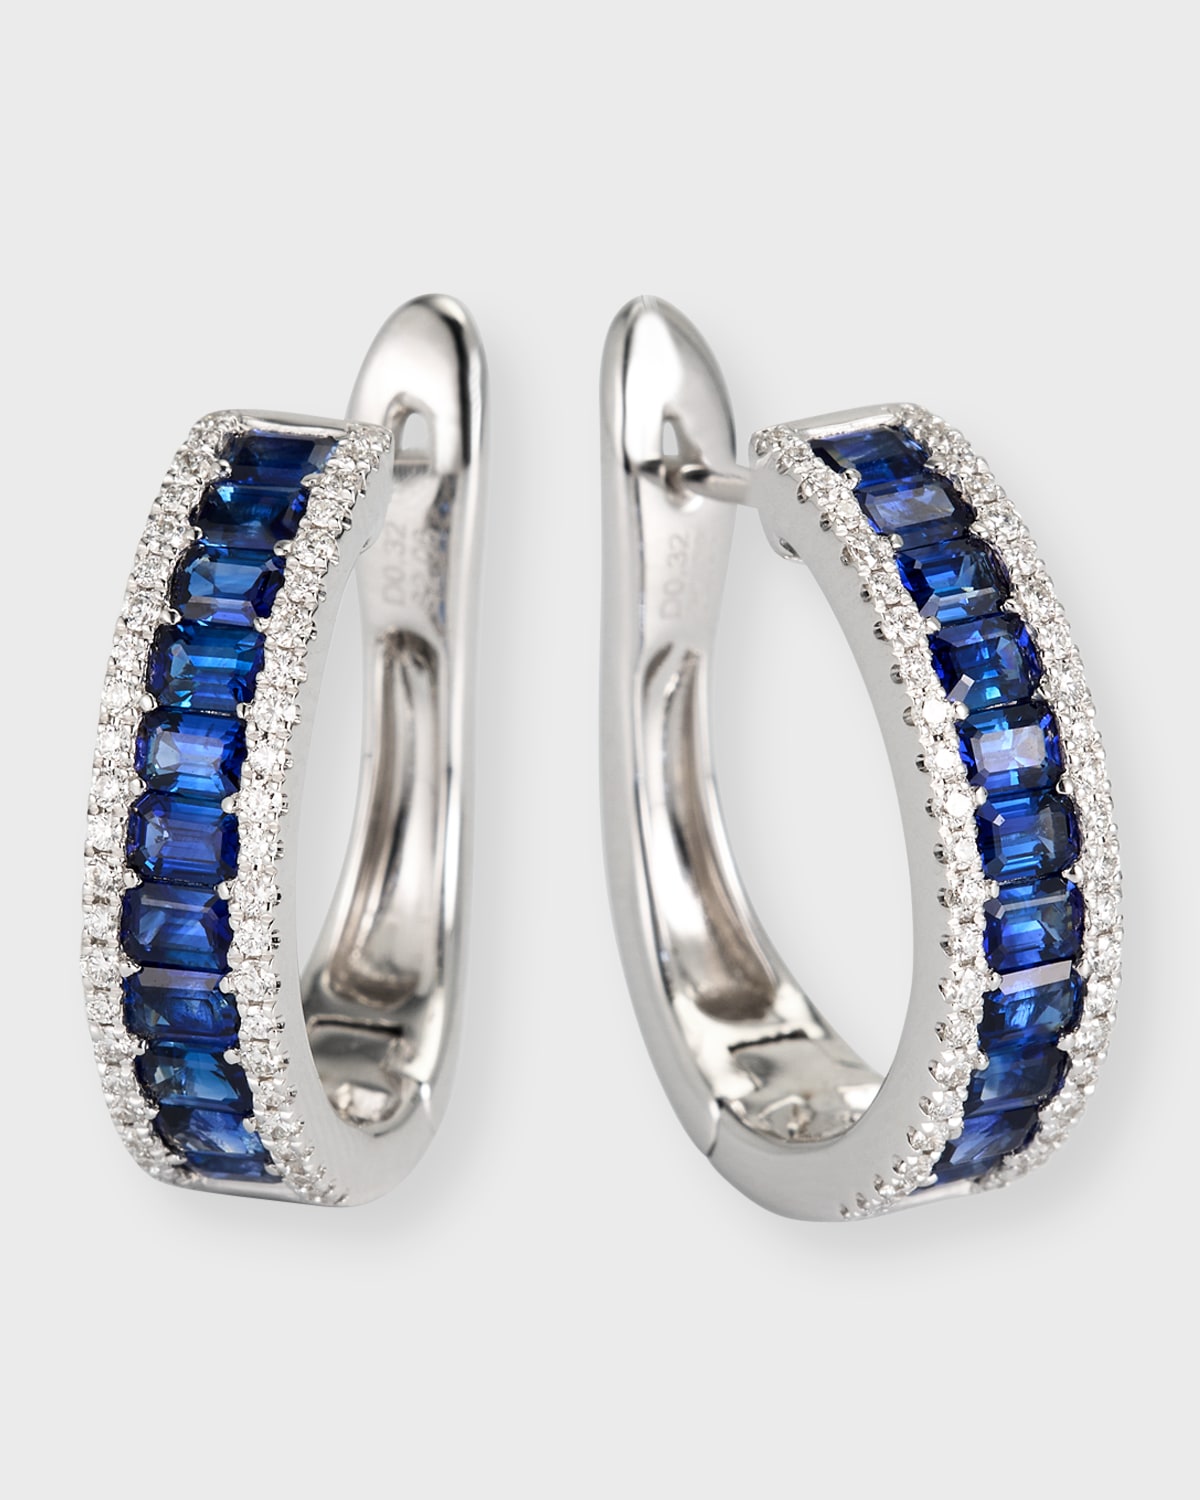 David Kord 18k White Gold Earrings With Blue Sapphires And Diamonds